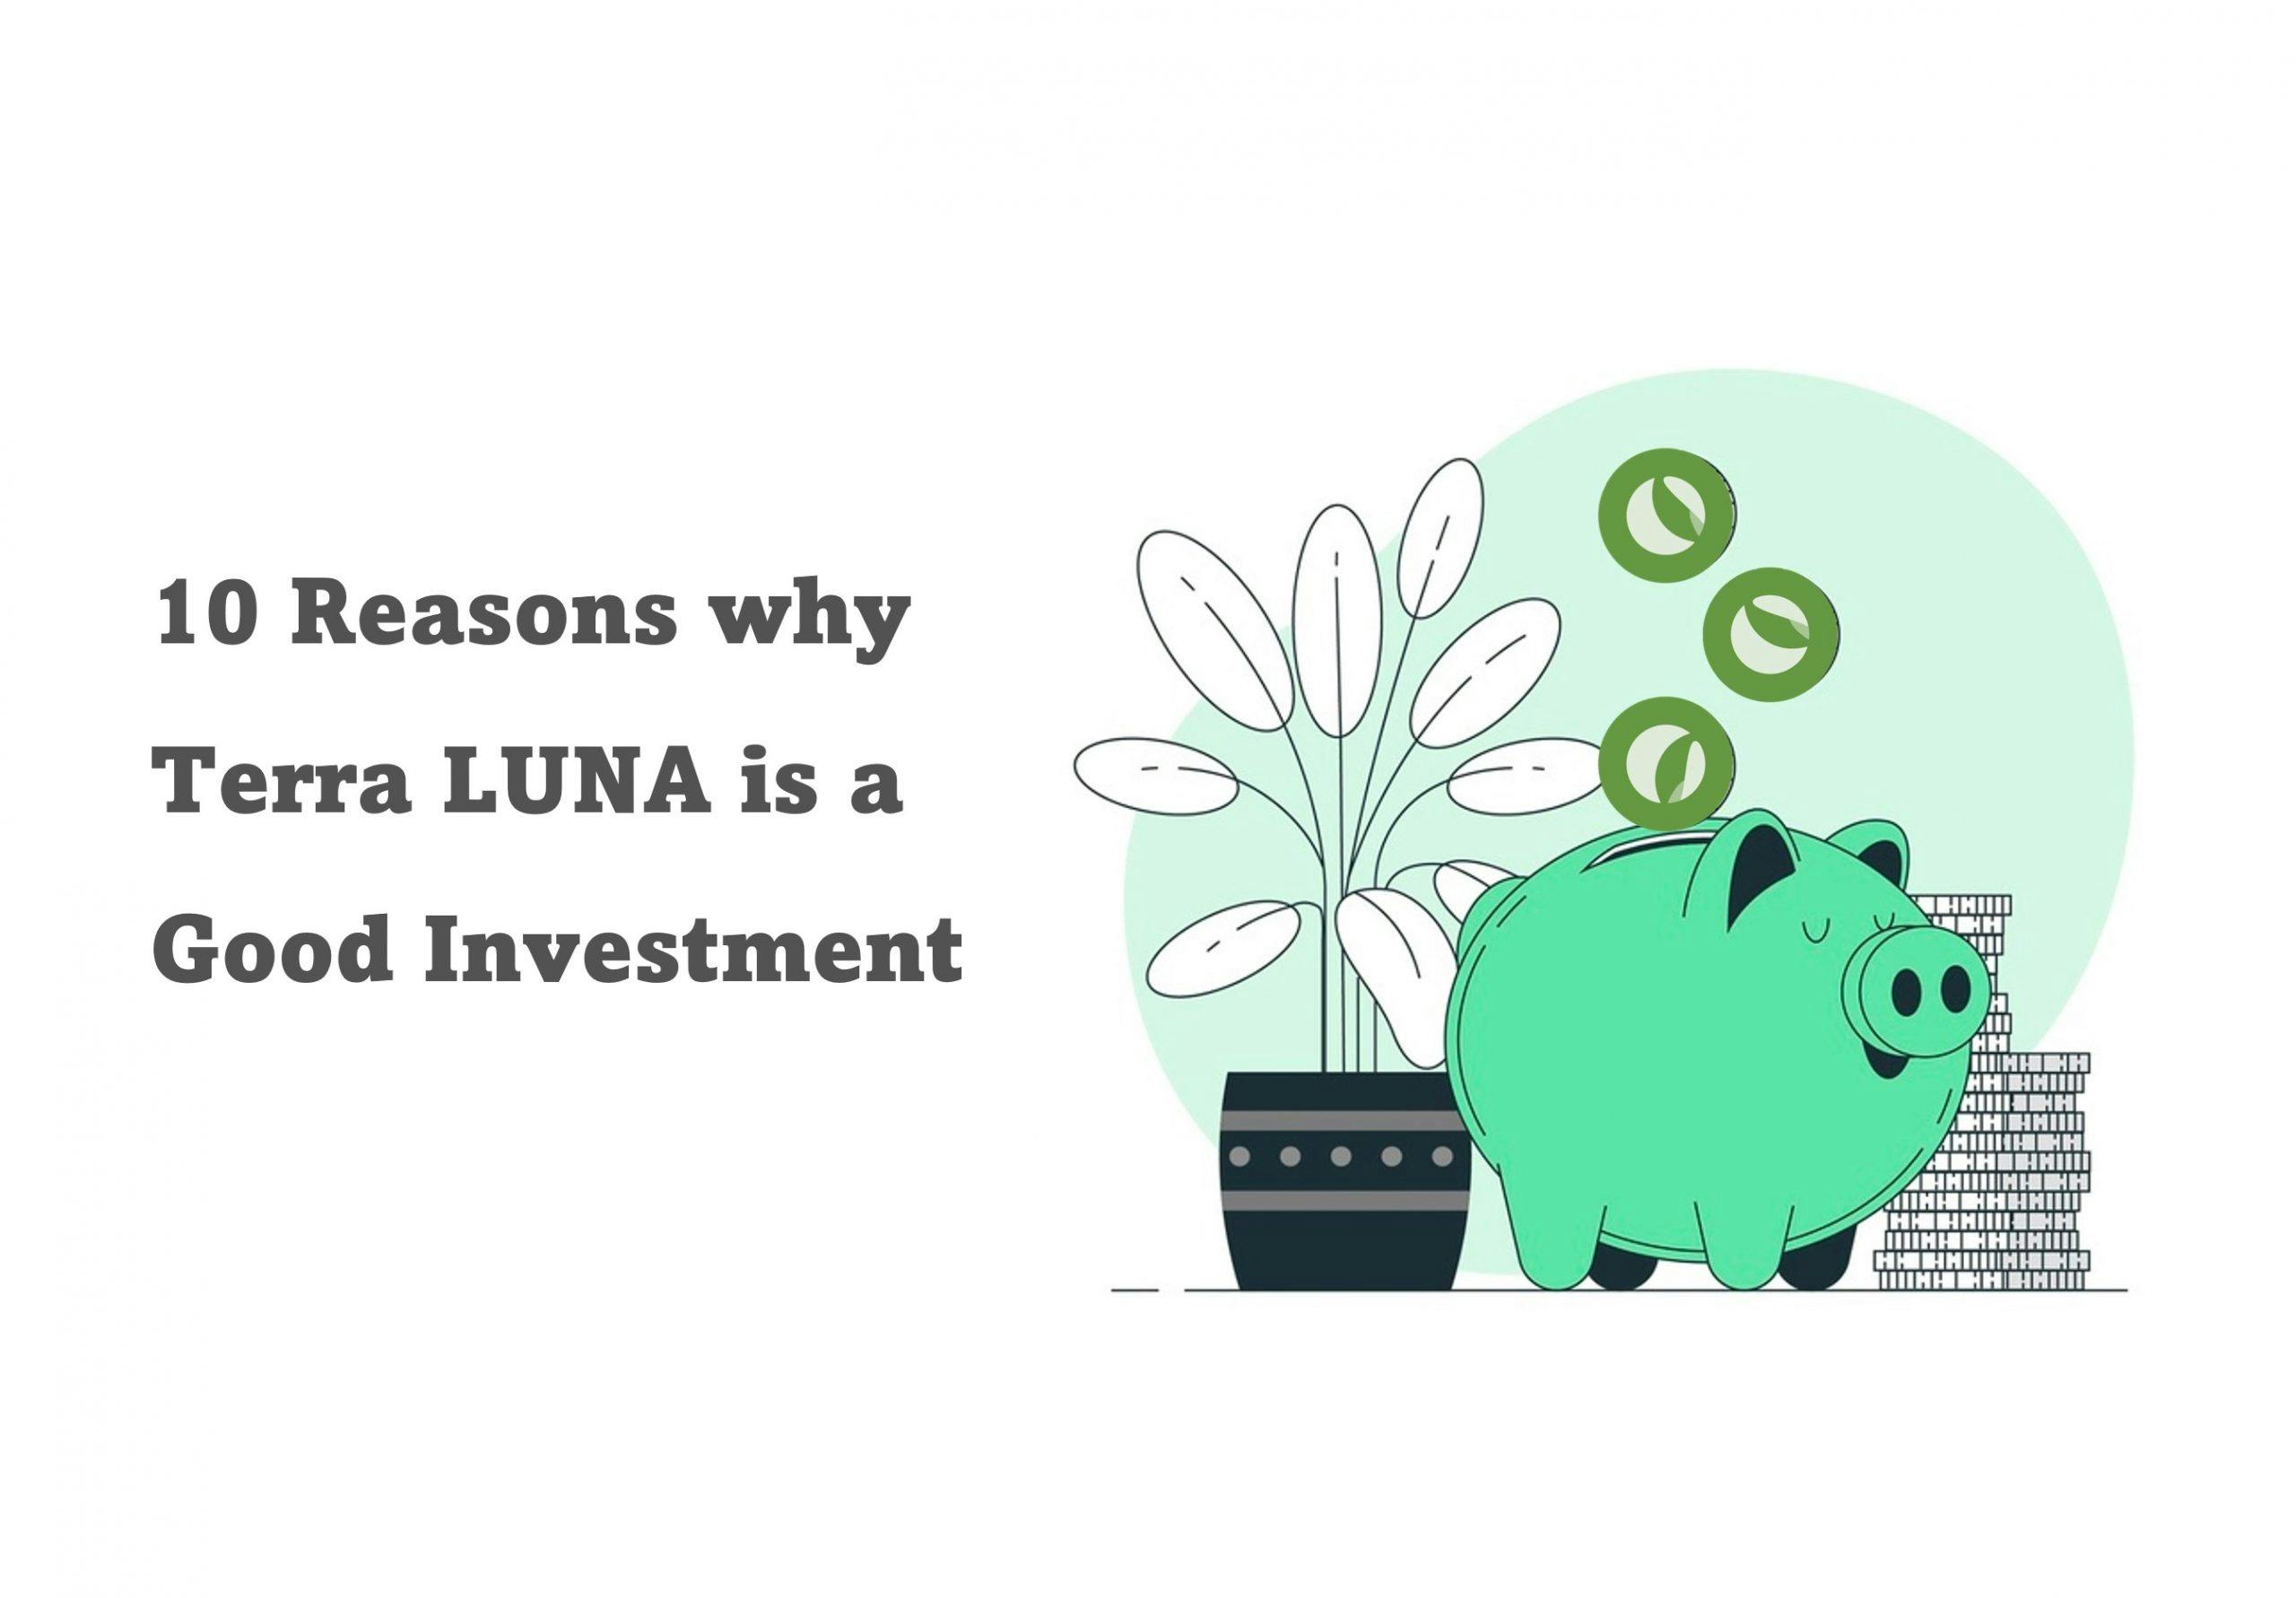 10 Reasons Why Terra LUNA is a Good Investment